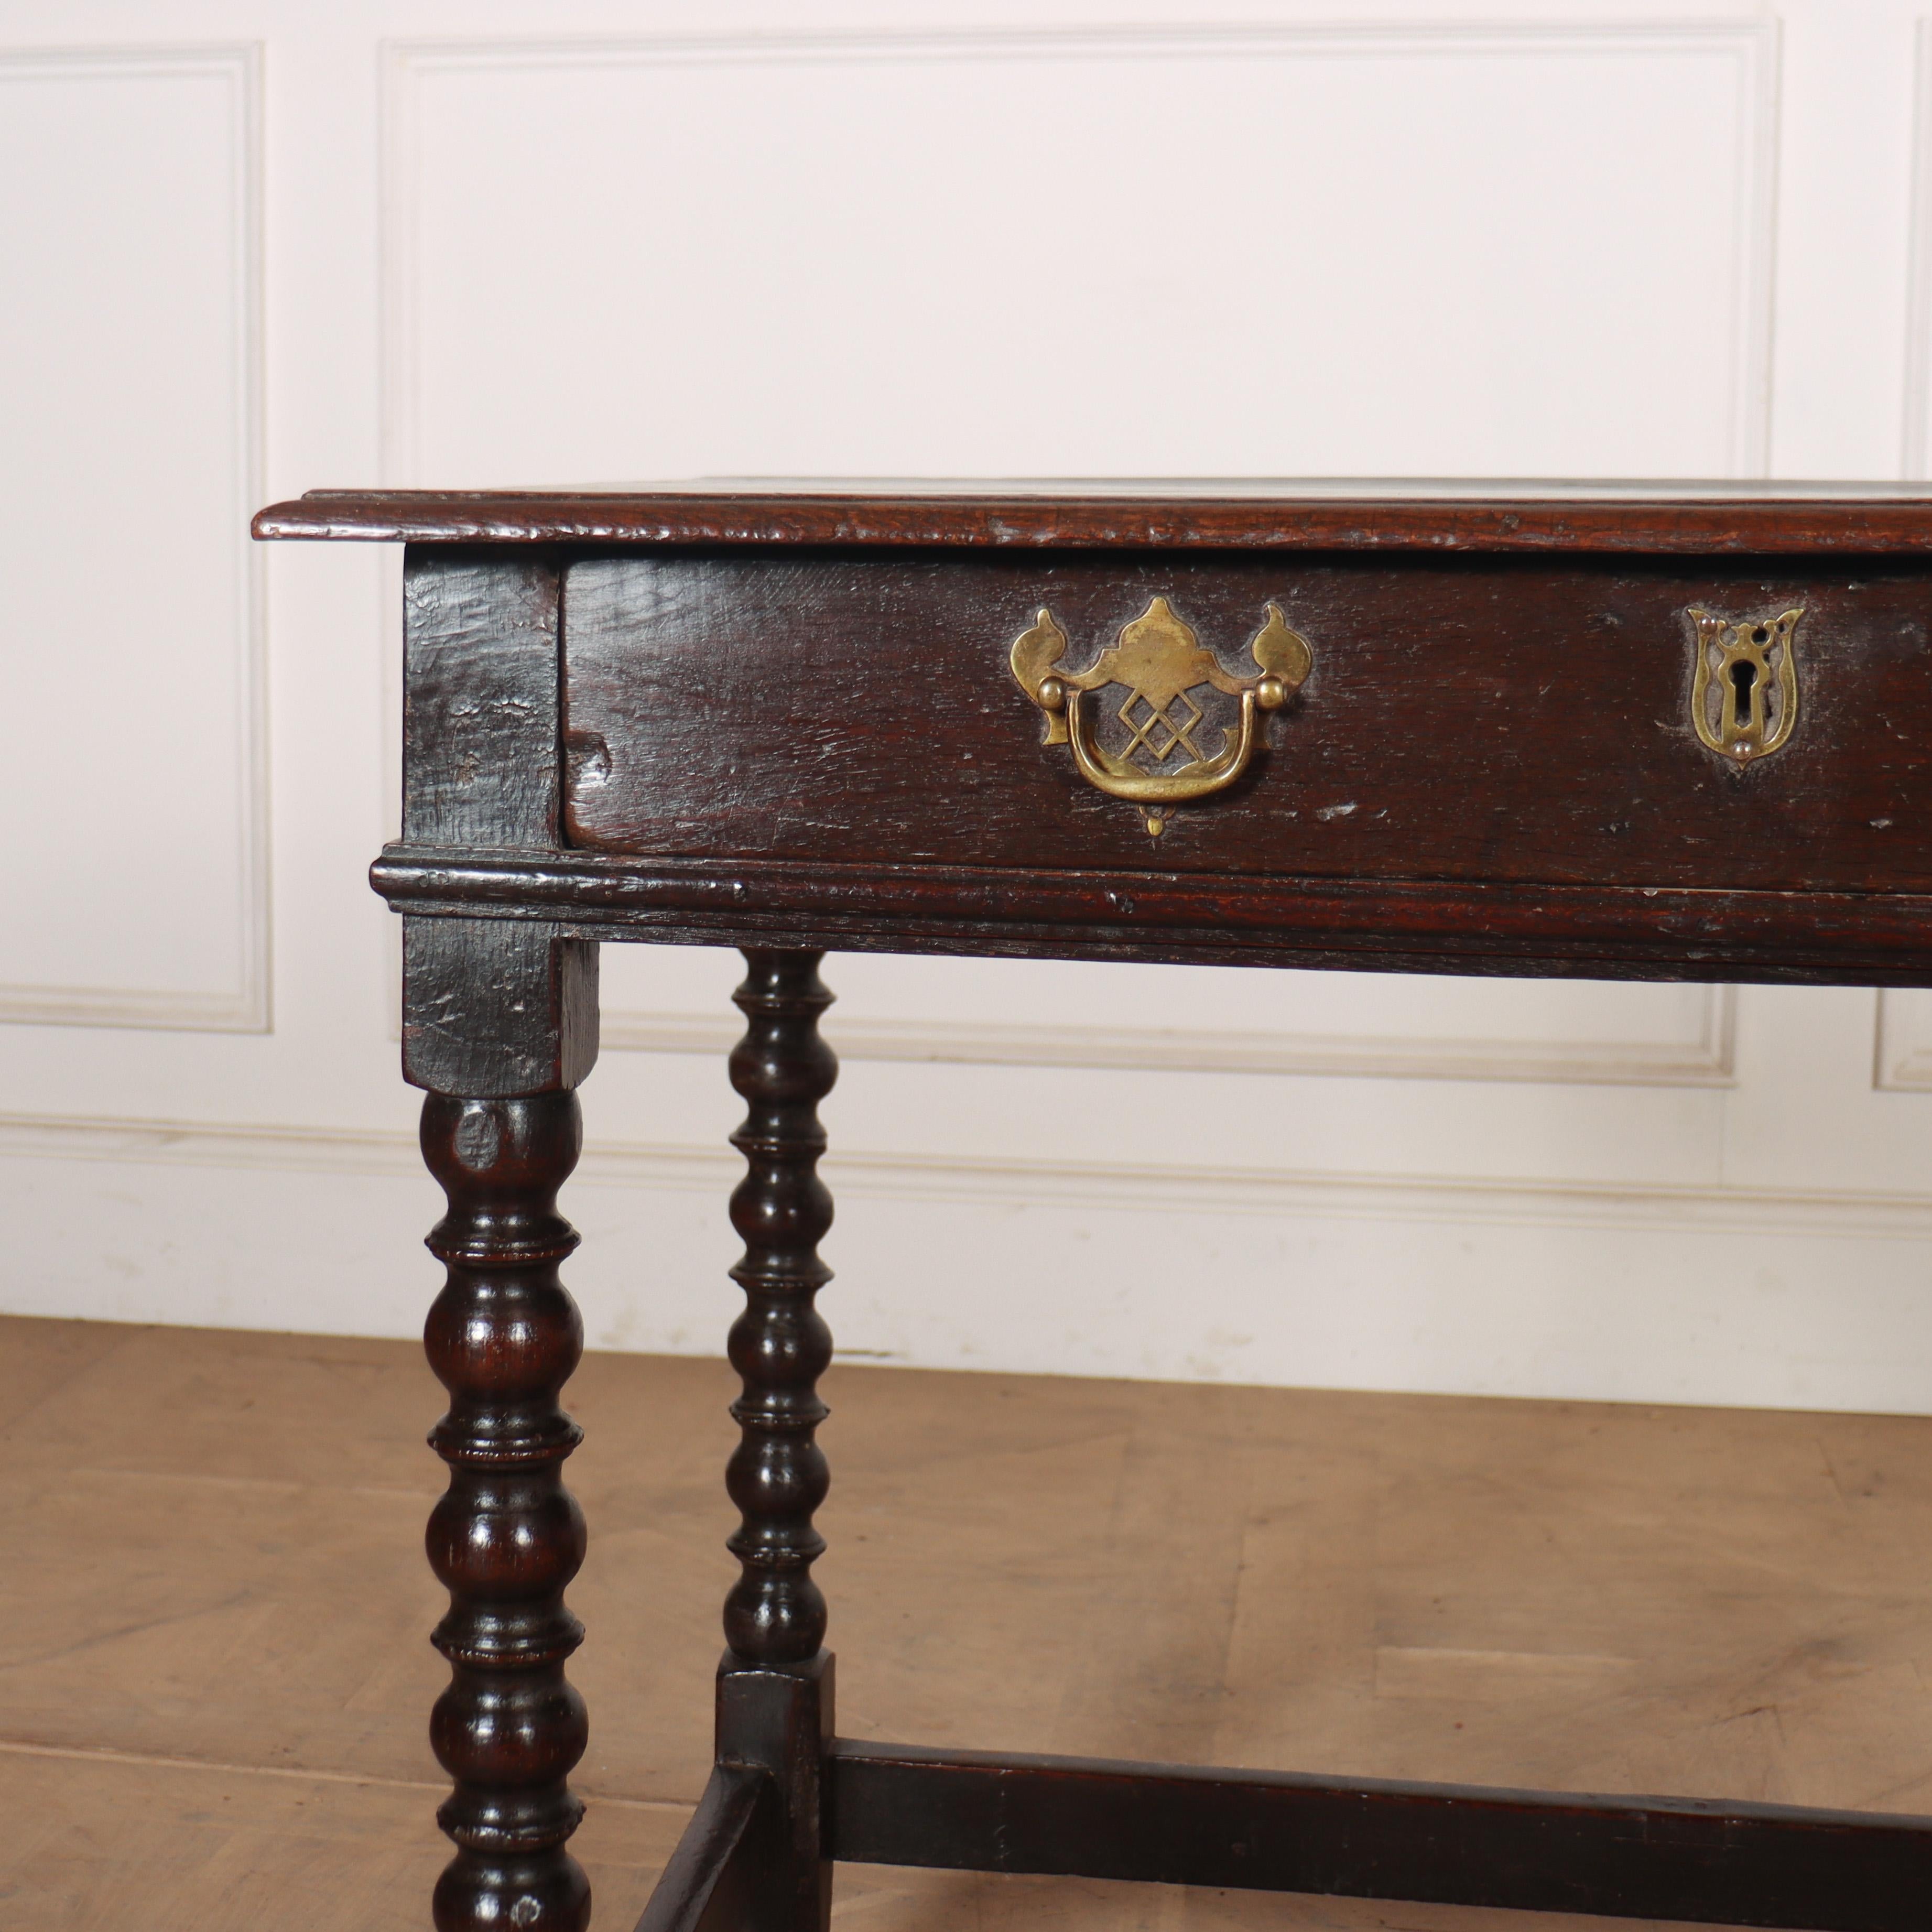 18th C English one drawer oak side / lamp table. 1750.

Reference: 8224

Dimensions
32.5 inches (83 cms) Wide
22.5 inches (57 cms) Deep
29 inches (74 cms) High